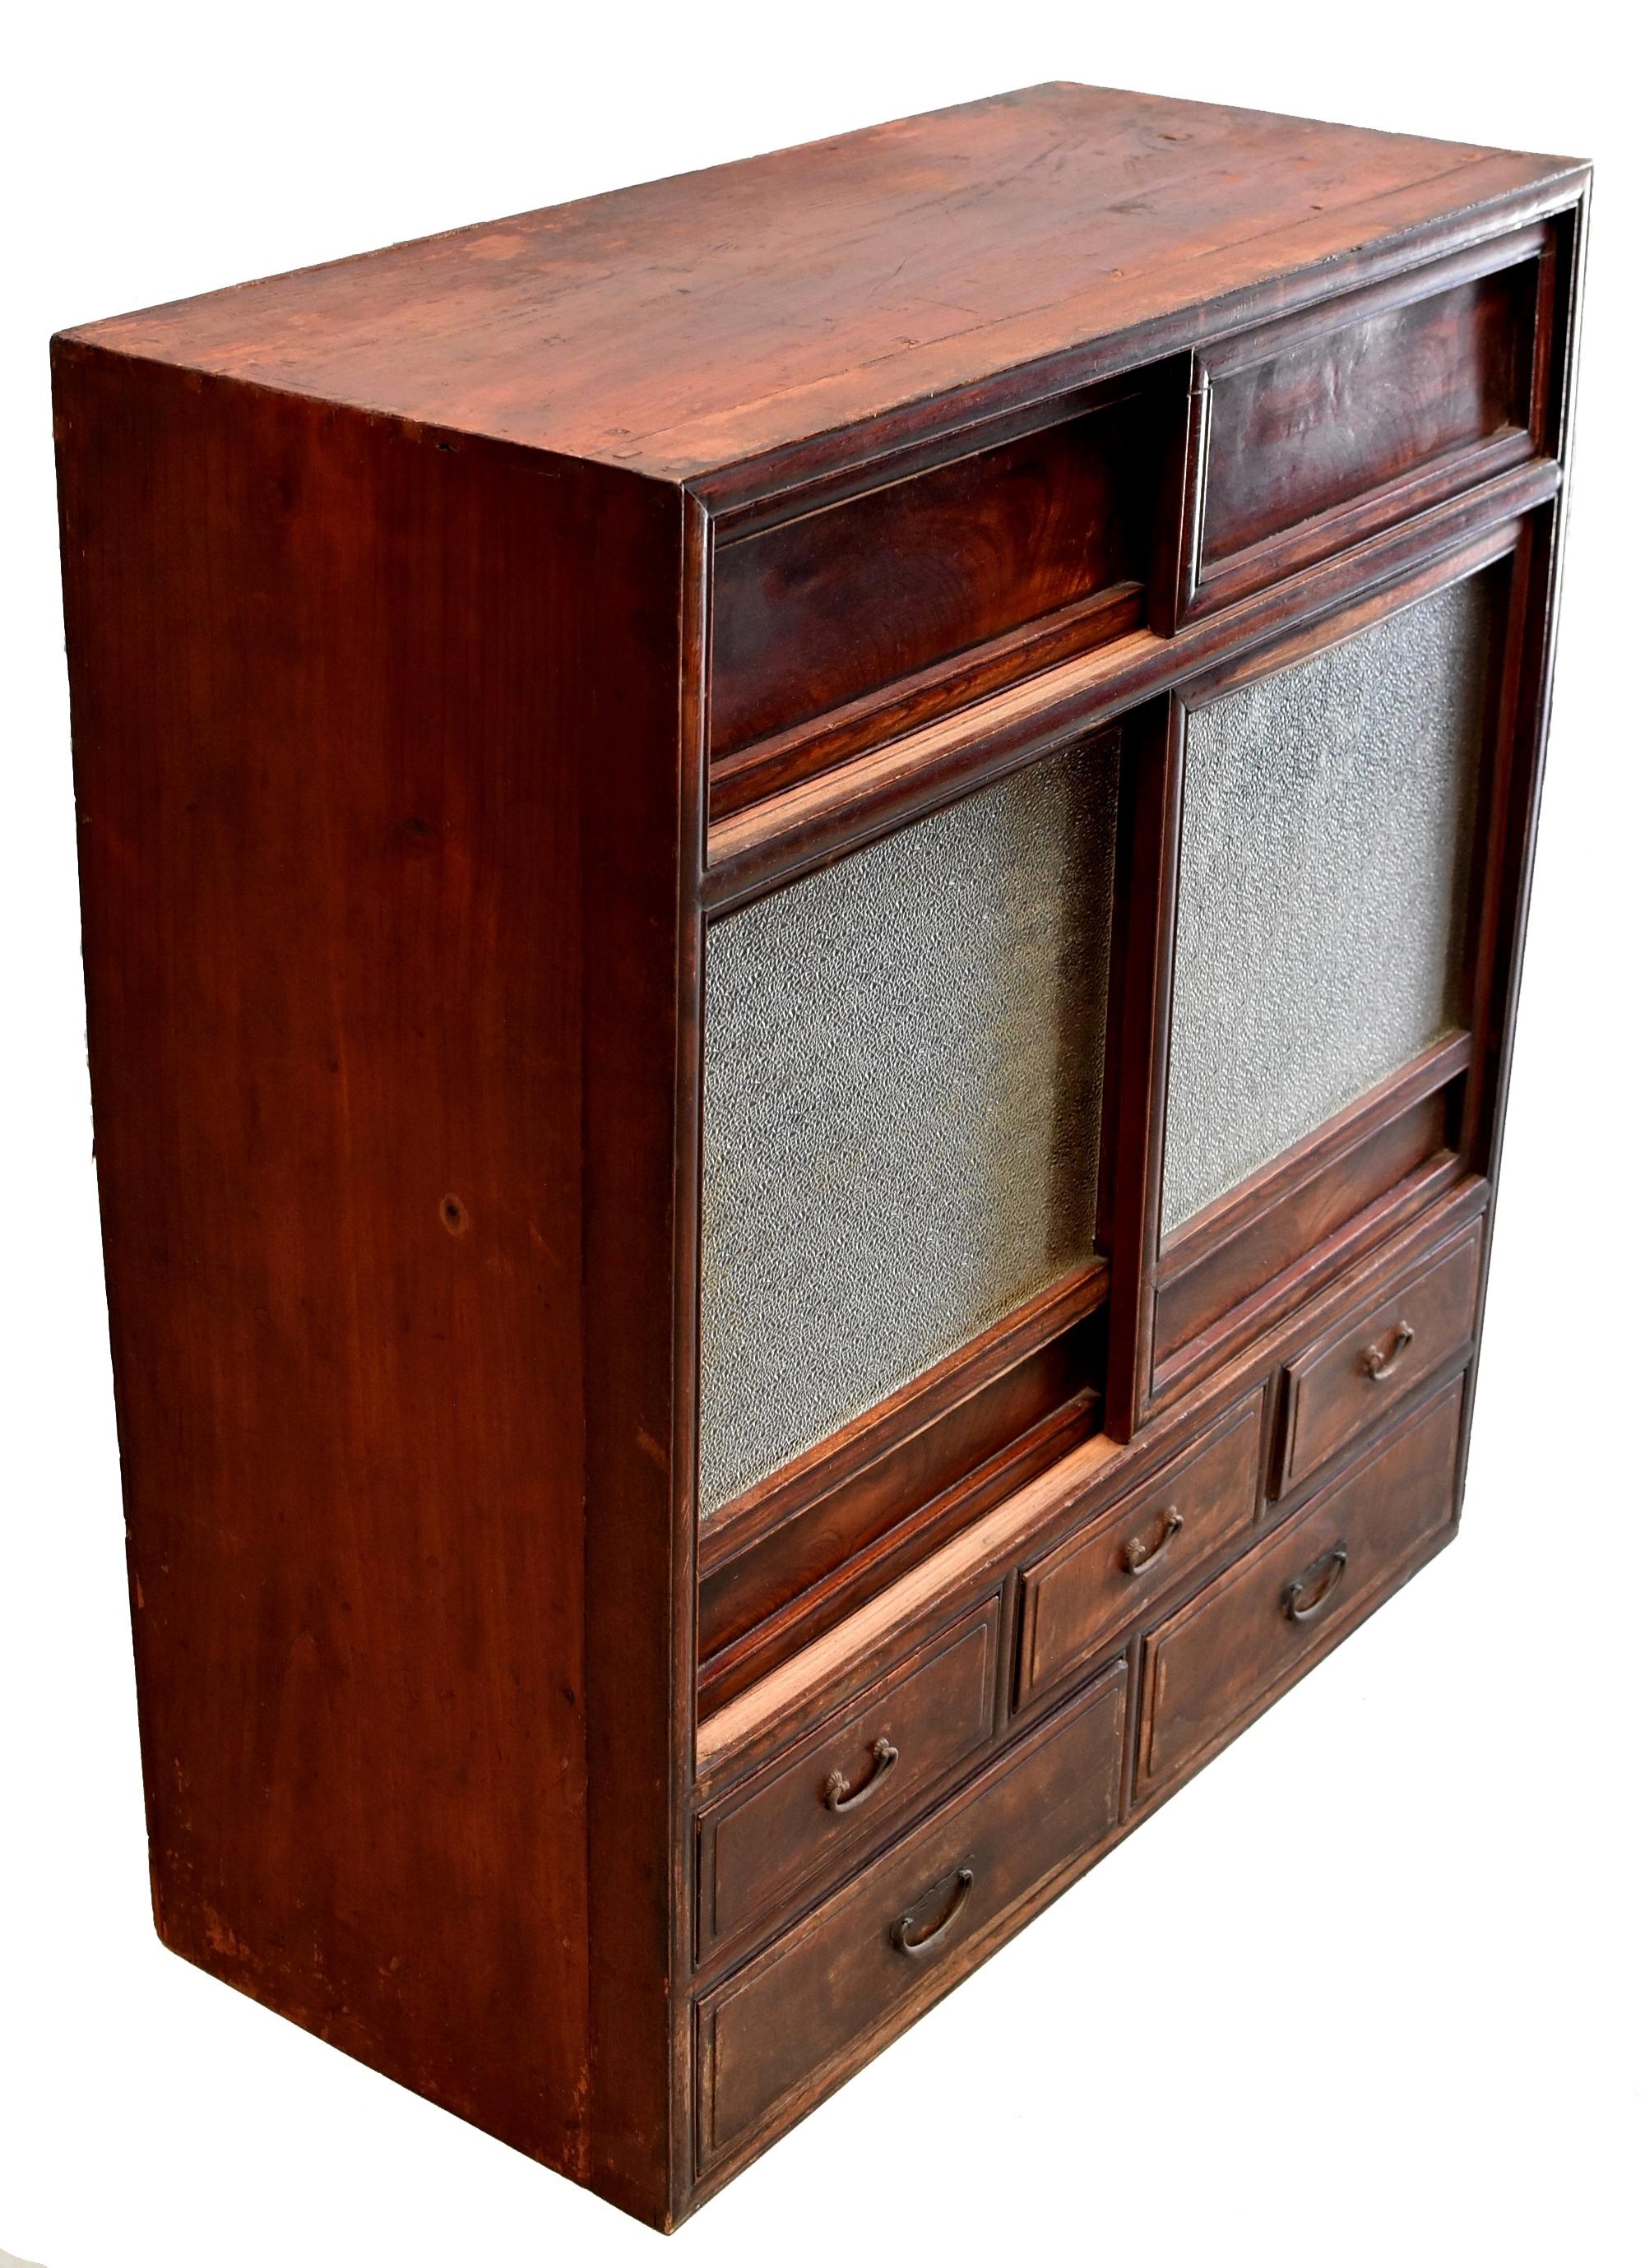 A beautiful vintage Japanese Tansu with five drawers and a pair of each glass and wood sliding doors. Behind the textured glass doors, is a tiered shelf unit with a nice carved feature. The wood has beautiful grains. Five full capacity drawers offer